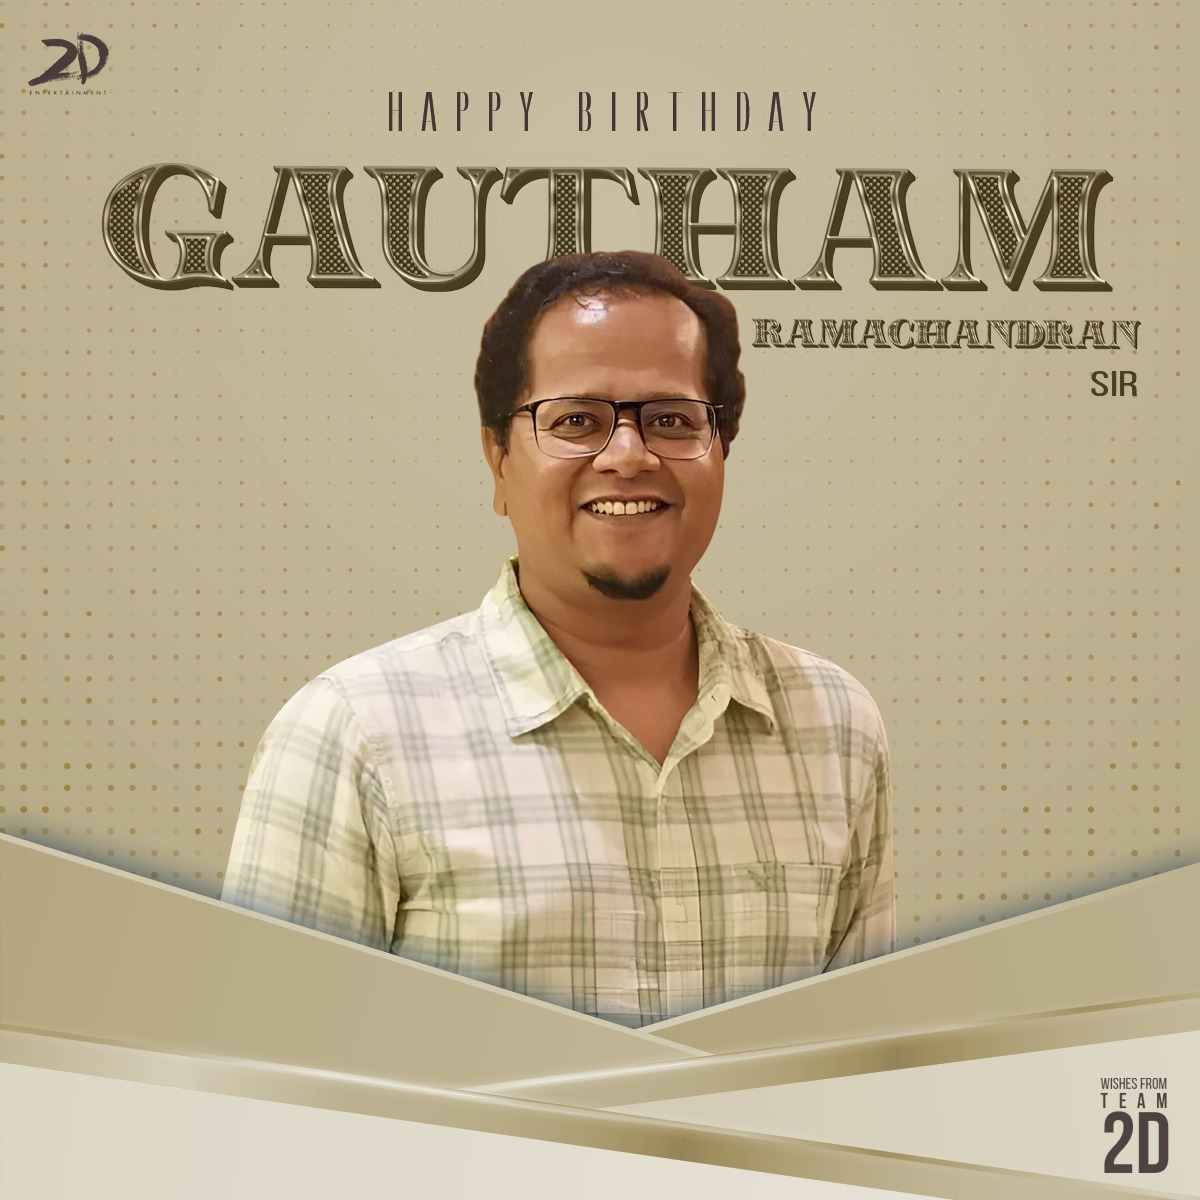 Happy Birthday to @prgautham83, a true master of storytelling and craftsmanship ✨ May your day be as extraordinary as you are and the year ahead be filled with new achievements and joy! #HBDGauthamRamachandran